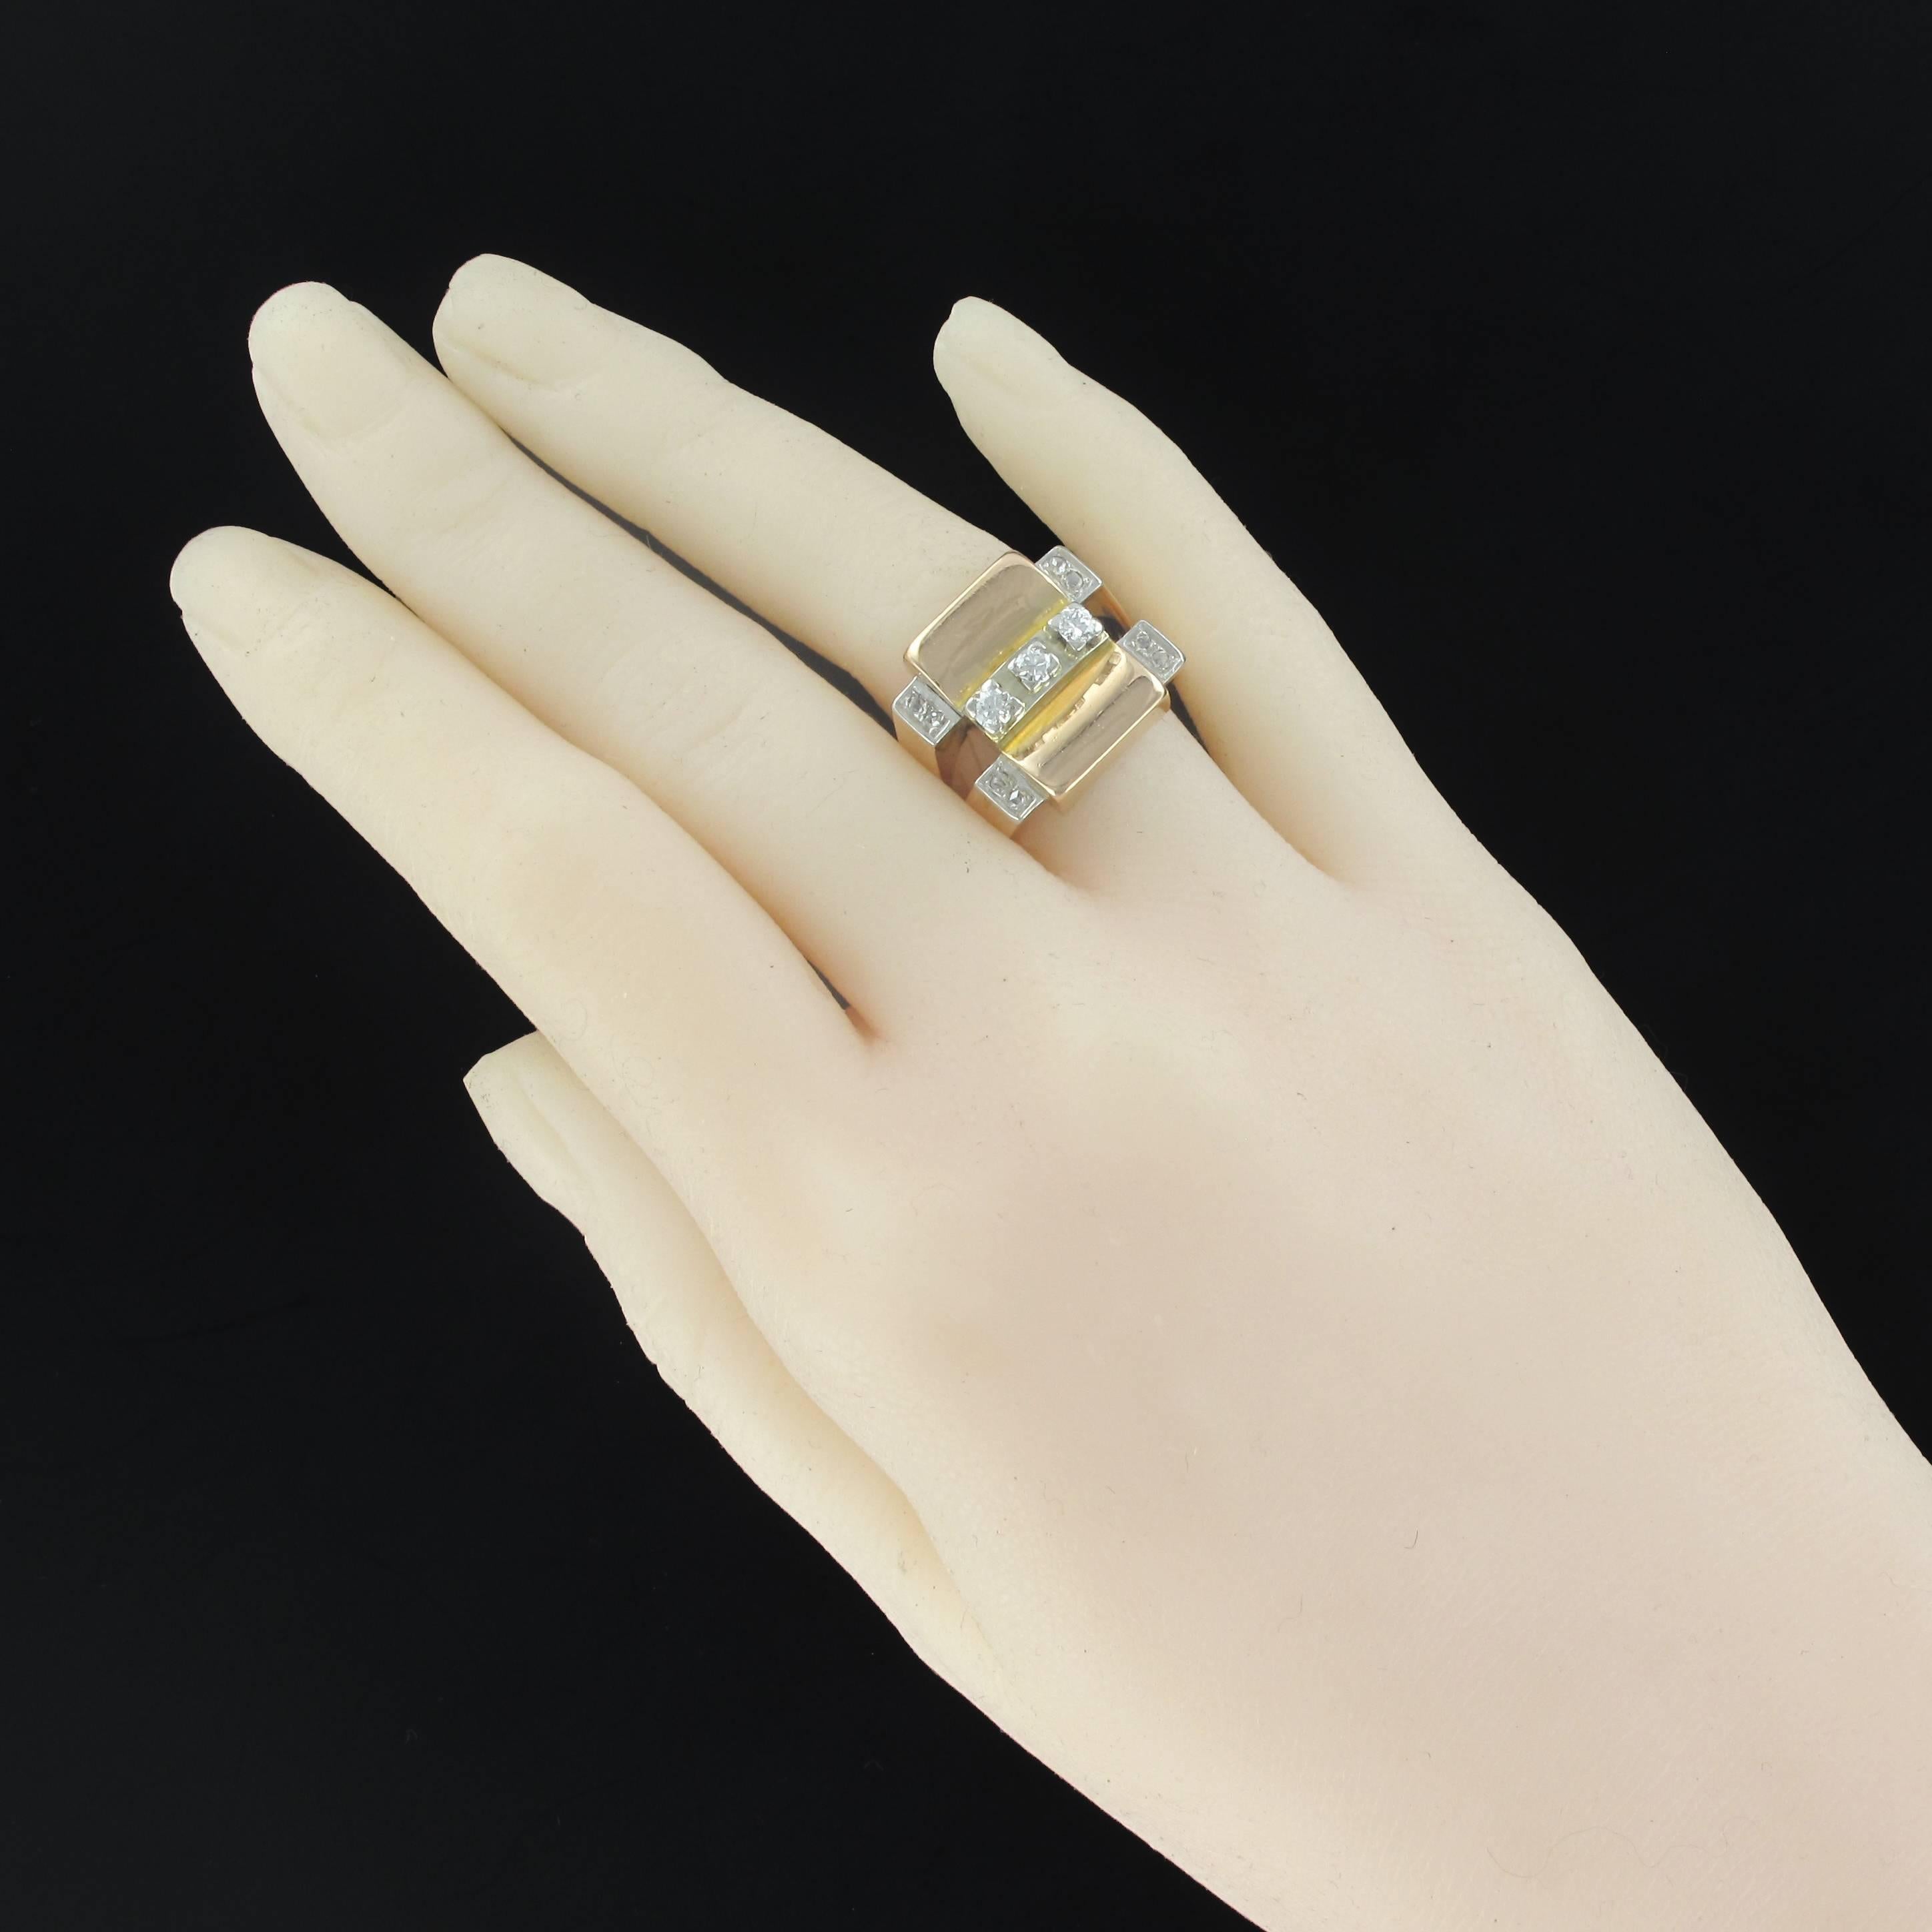 Ring in 18 carats yellow gold.
This amazing square shaped tank ring is set with claws on its top, of a line of 3 brilliant cut diamonds. On either side, 4 x 2 rose cut diamonds are set on the starts of the ring which then join to form one.
Total